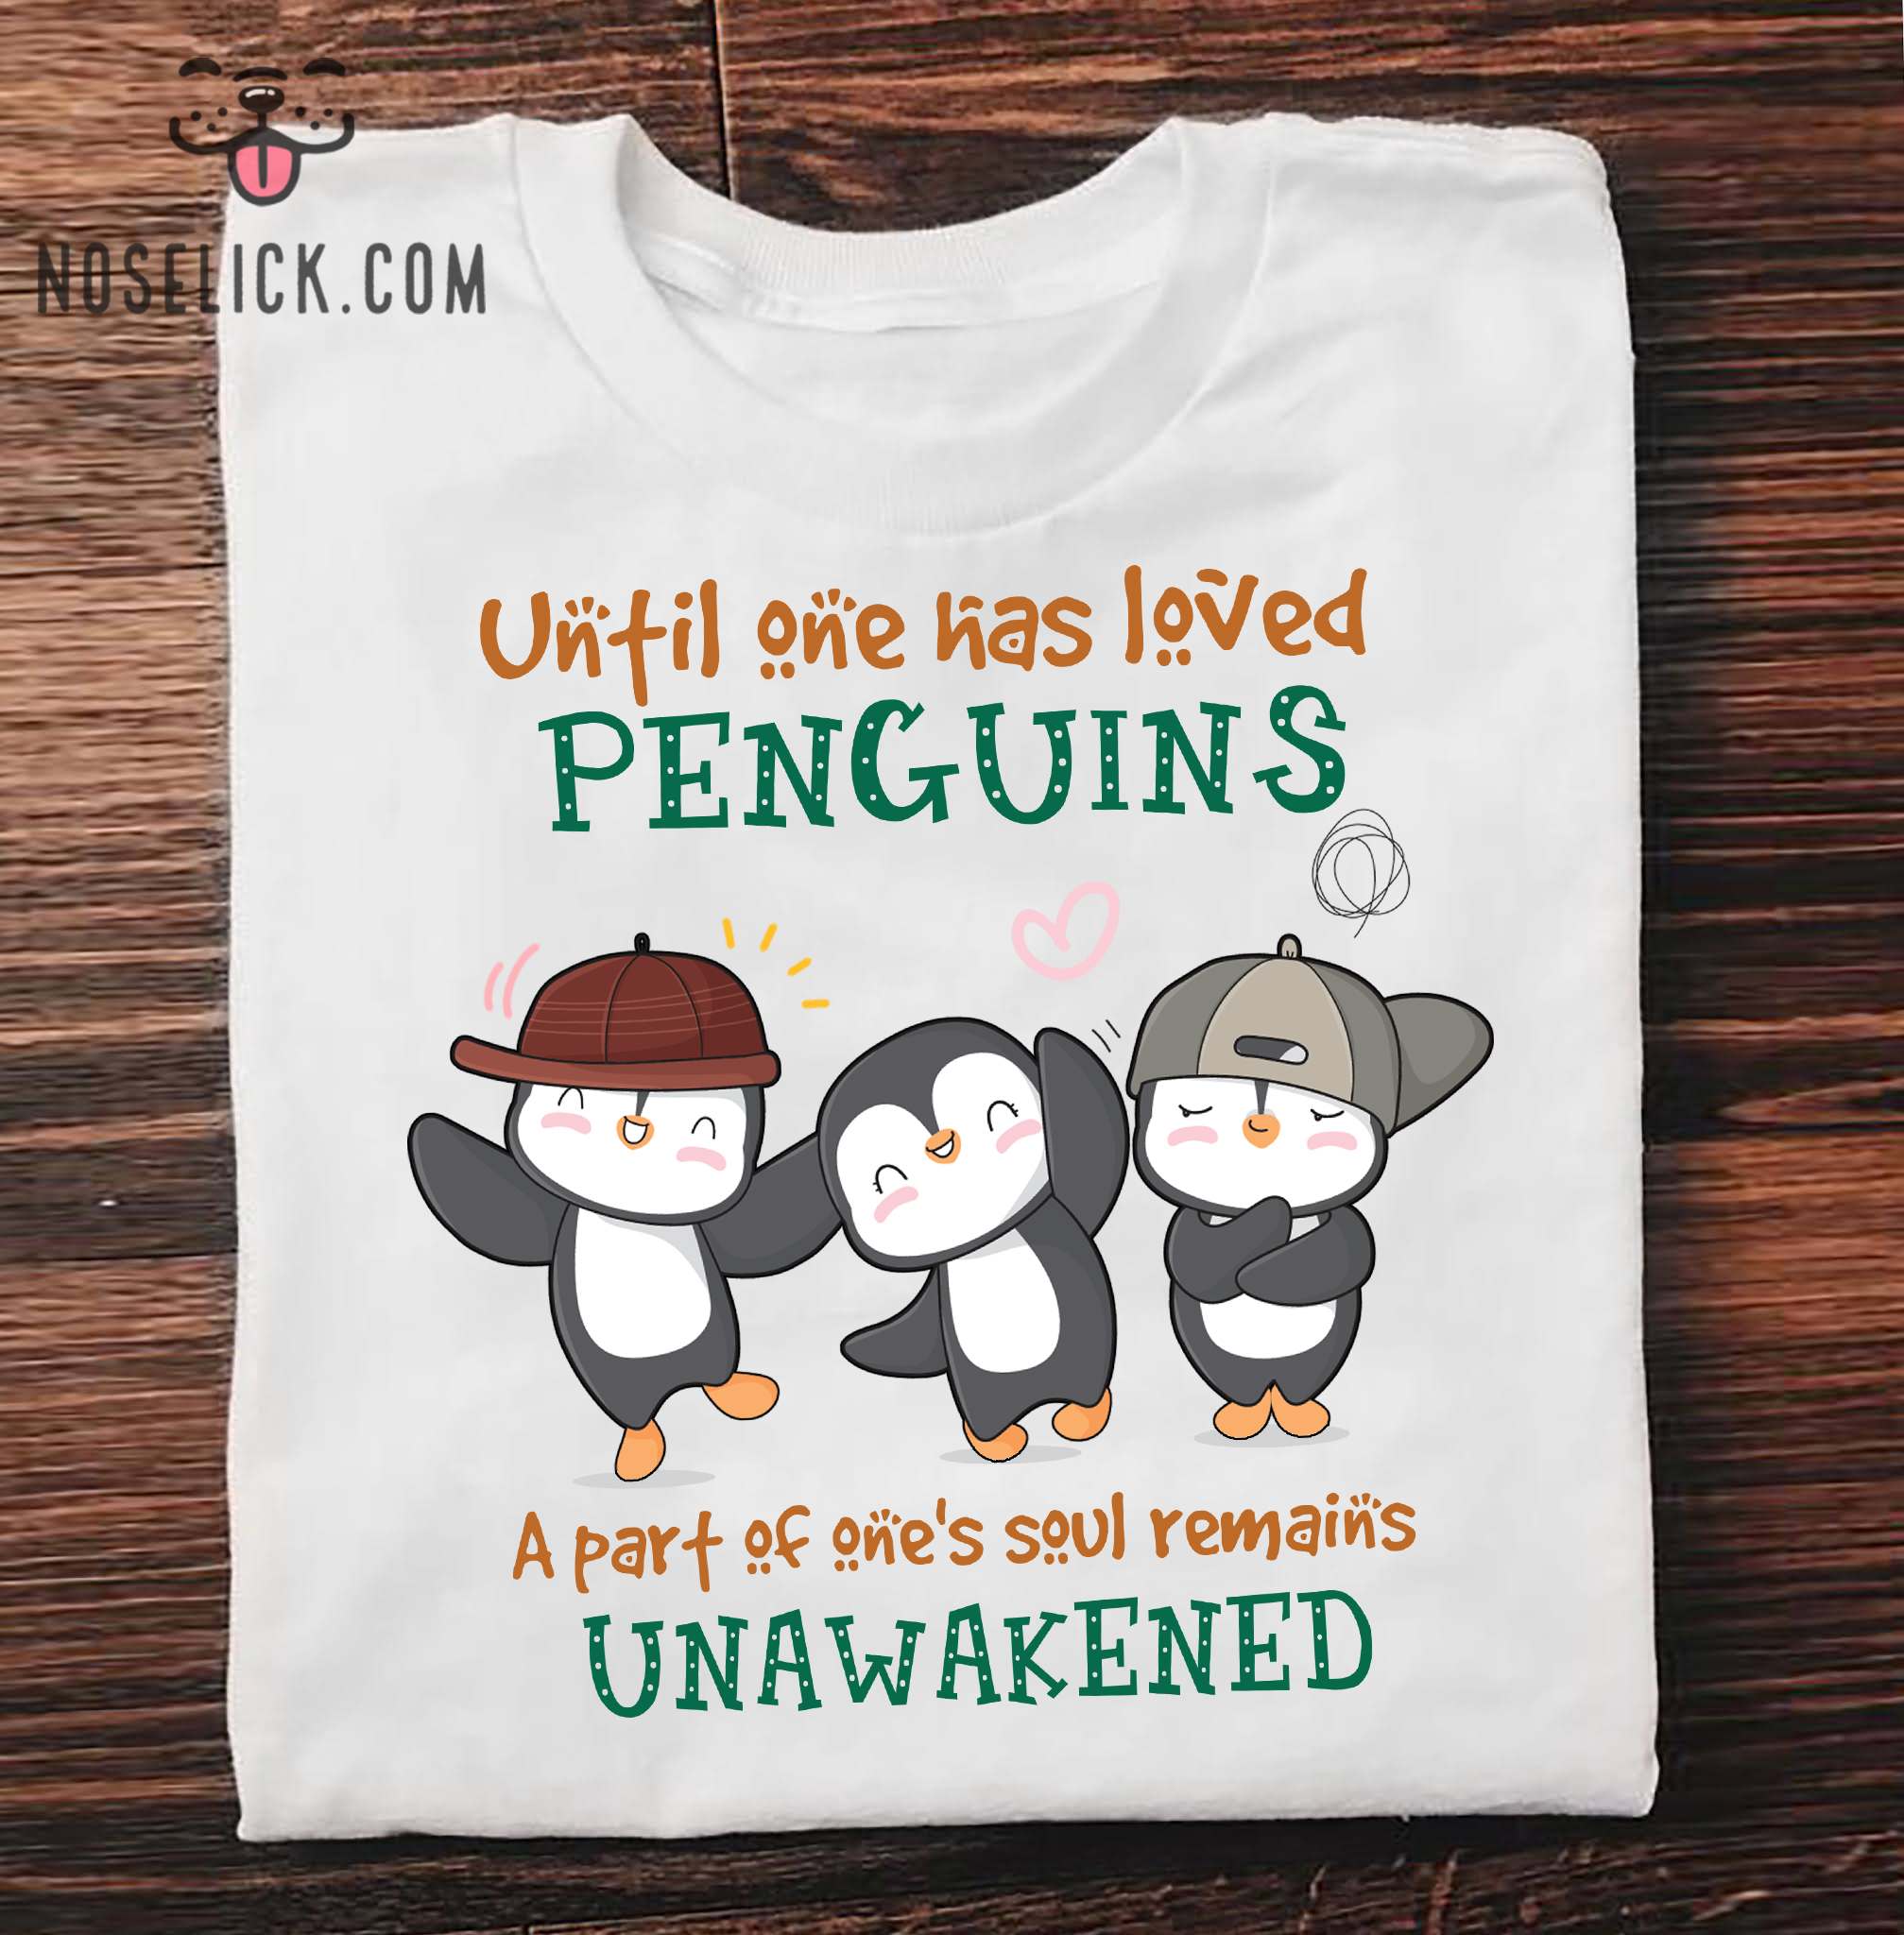 Until one has loved penguins a part of one's soul remains unawakened - Penguin lover